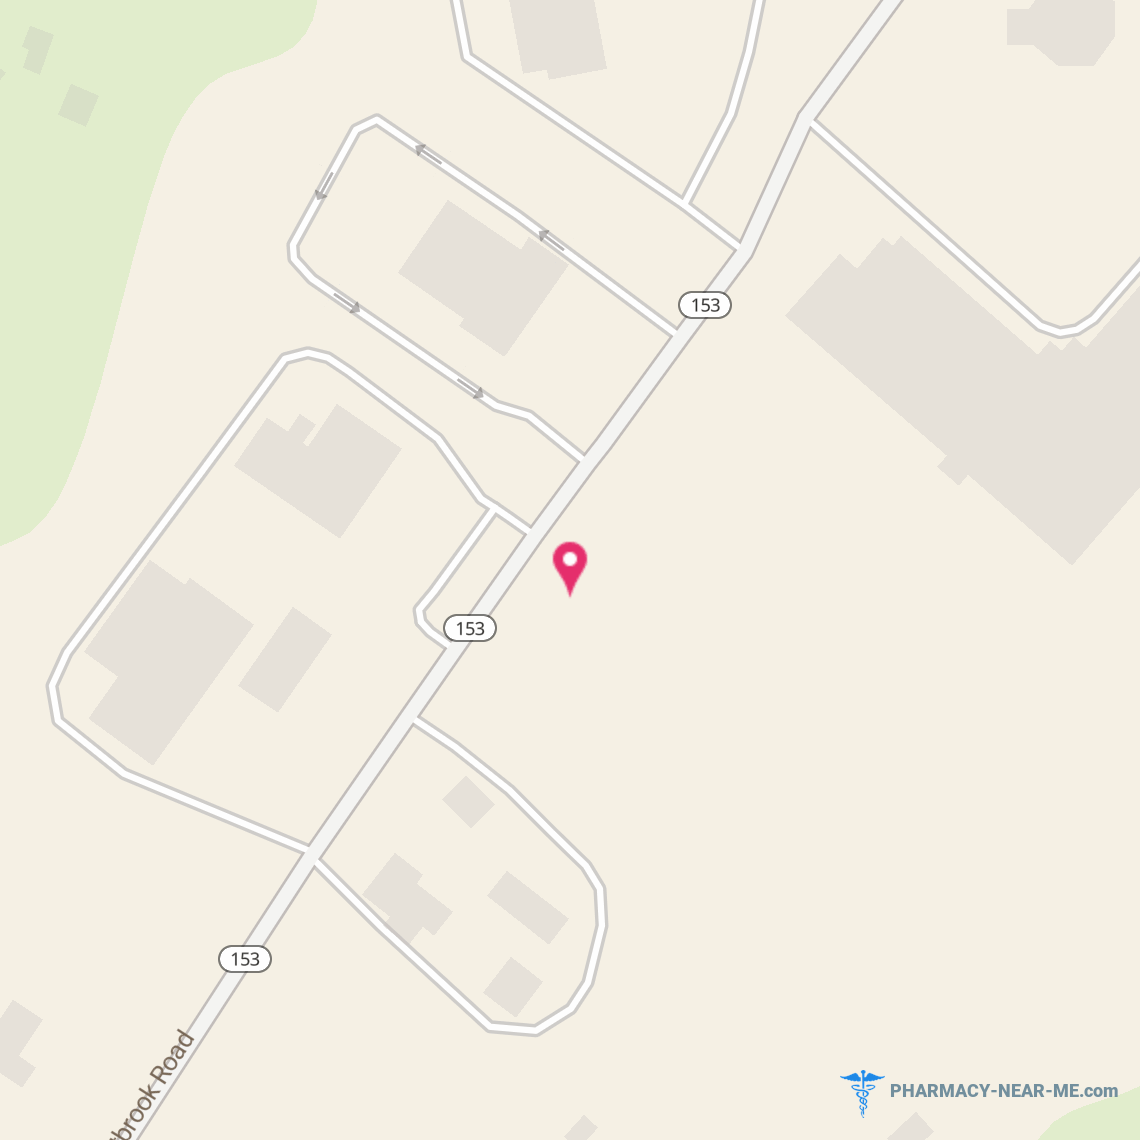 RITE AID - Pharmacy Hours, Phone, Reviews & Information: 125 Westbrook Road, Essex, Connecticut 06426, United States